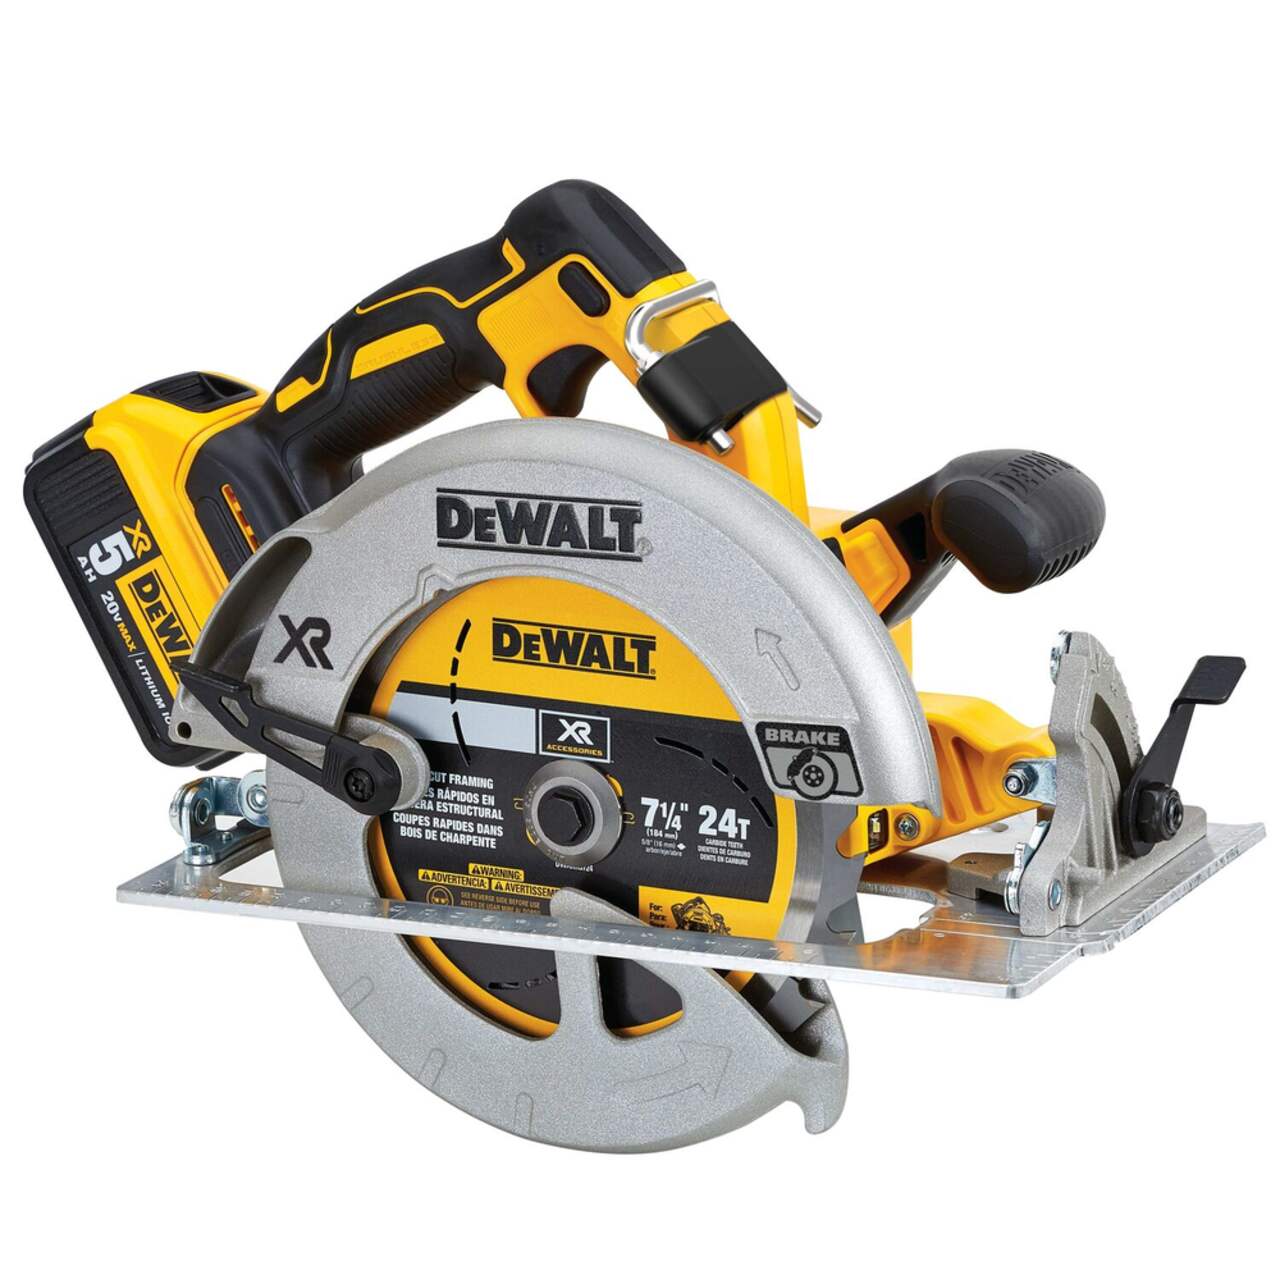 https://media-www.canadiantire.ca/product/fixing/tools/portable-power-tools/5740029/20v-max-xr-7-1-4-circular-saw-5-0ah-w-battery-0625c091-0a49-42bc-87d3-e2592a3561a1.png?imdensity=1&imwidth=640&impolicy=mZoom